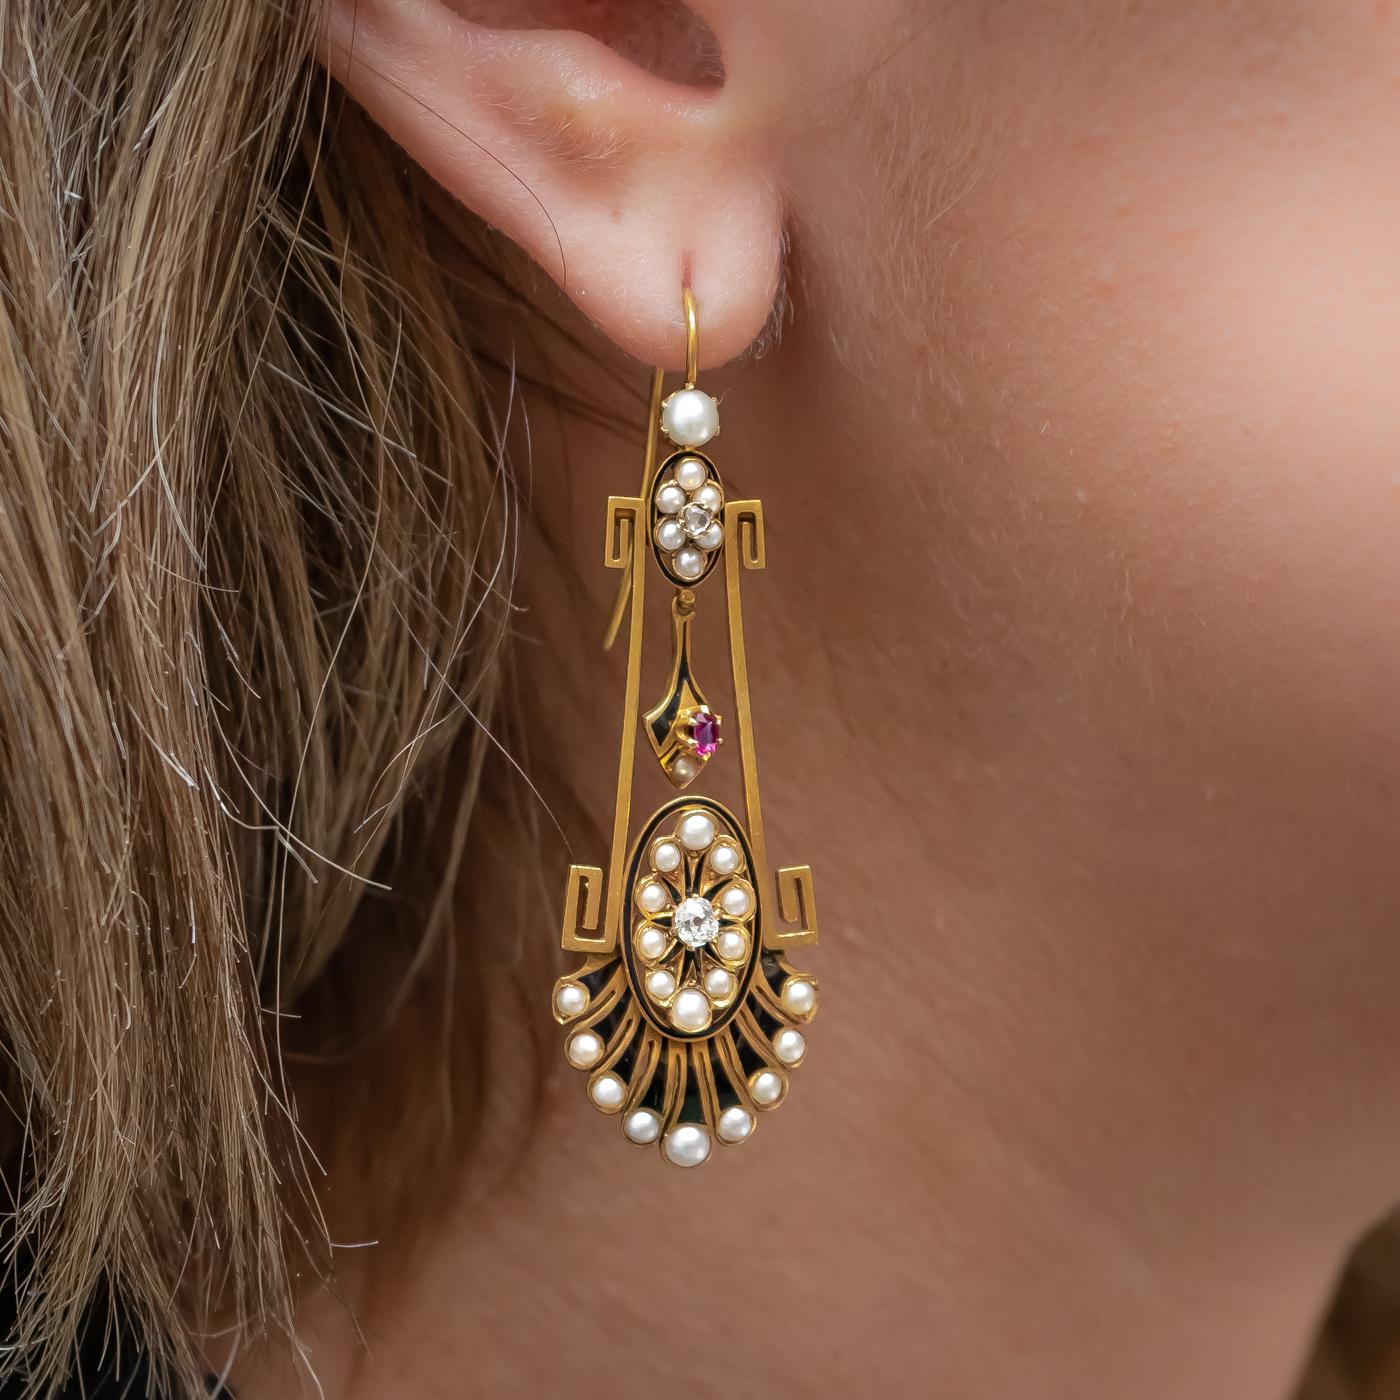 A pair of Victorian, Aesthetic Movement, drop earrings, set with natural half seed pearls, old and rose-cut diamonds and rubies, with black enamel, mounted in gold, on hooks, circa 1875.